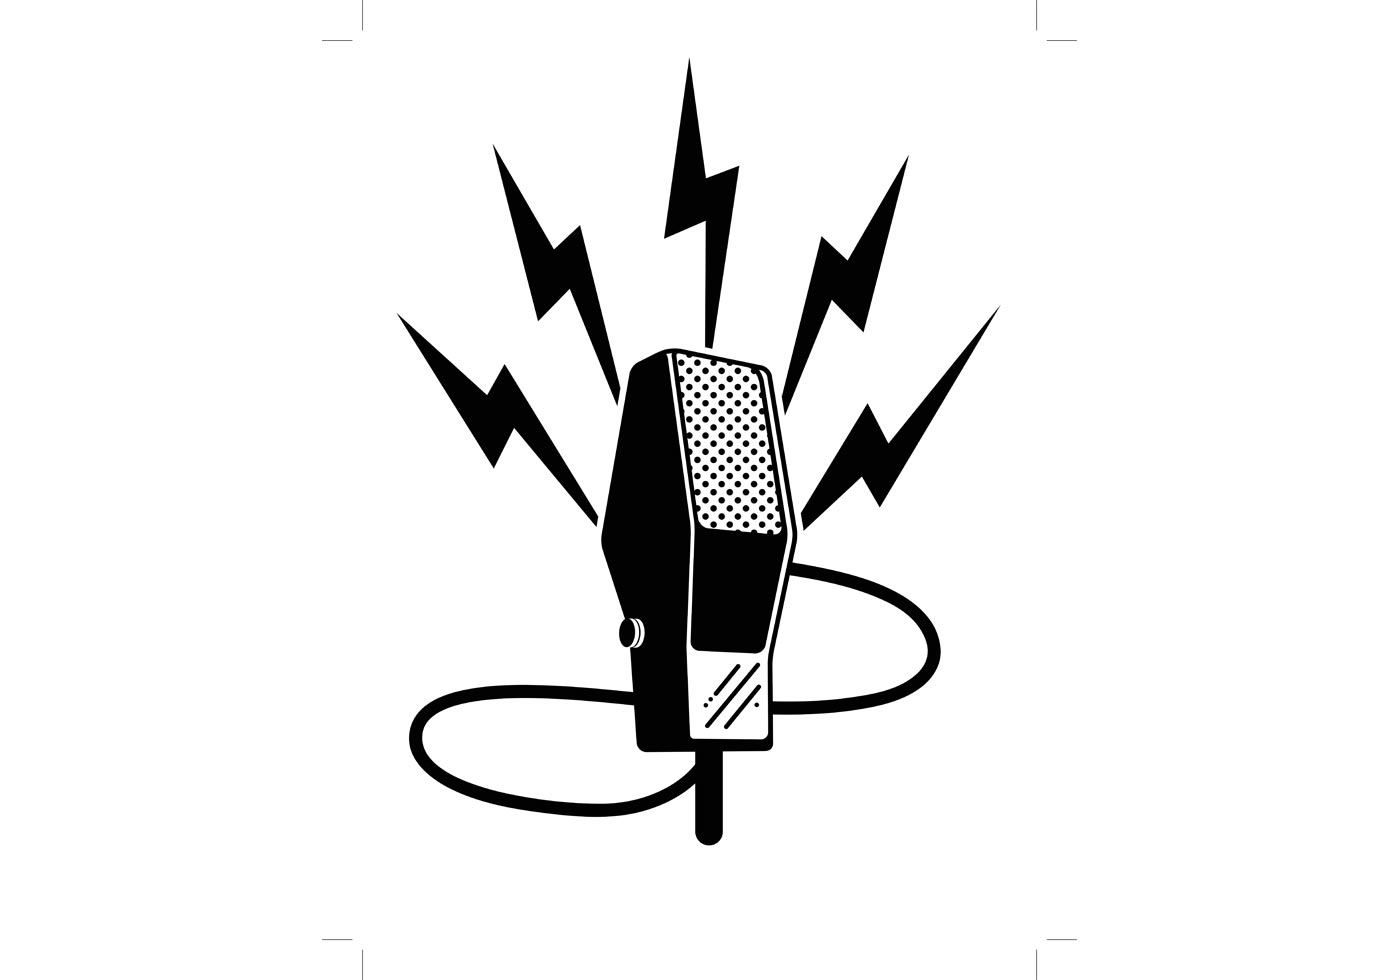 Microphone Icon Graphics - Download Free Vector Art, Stock ...